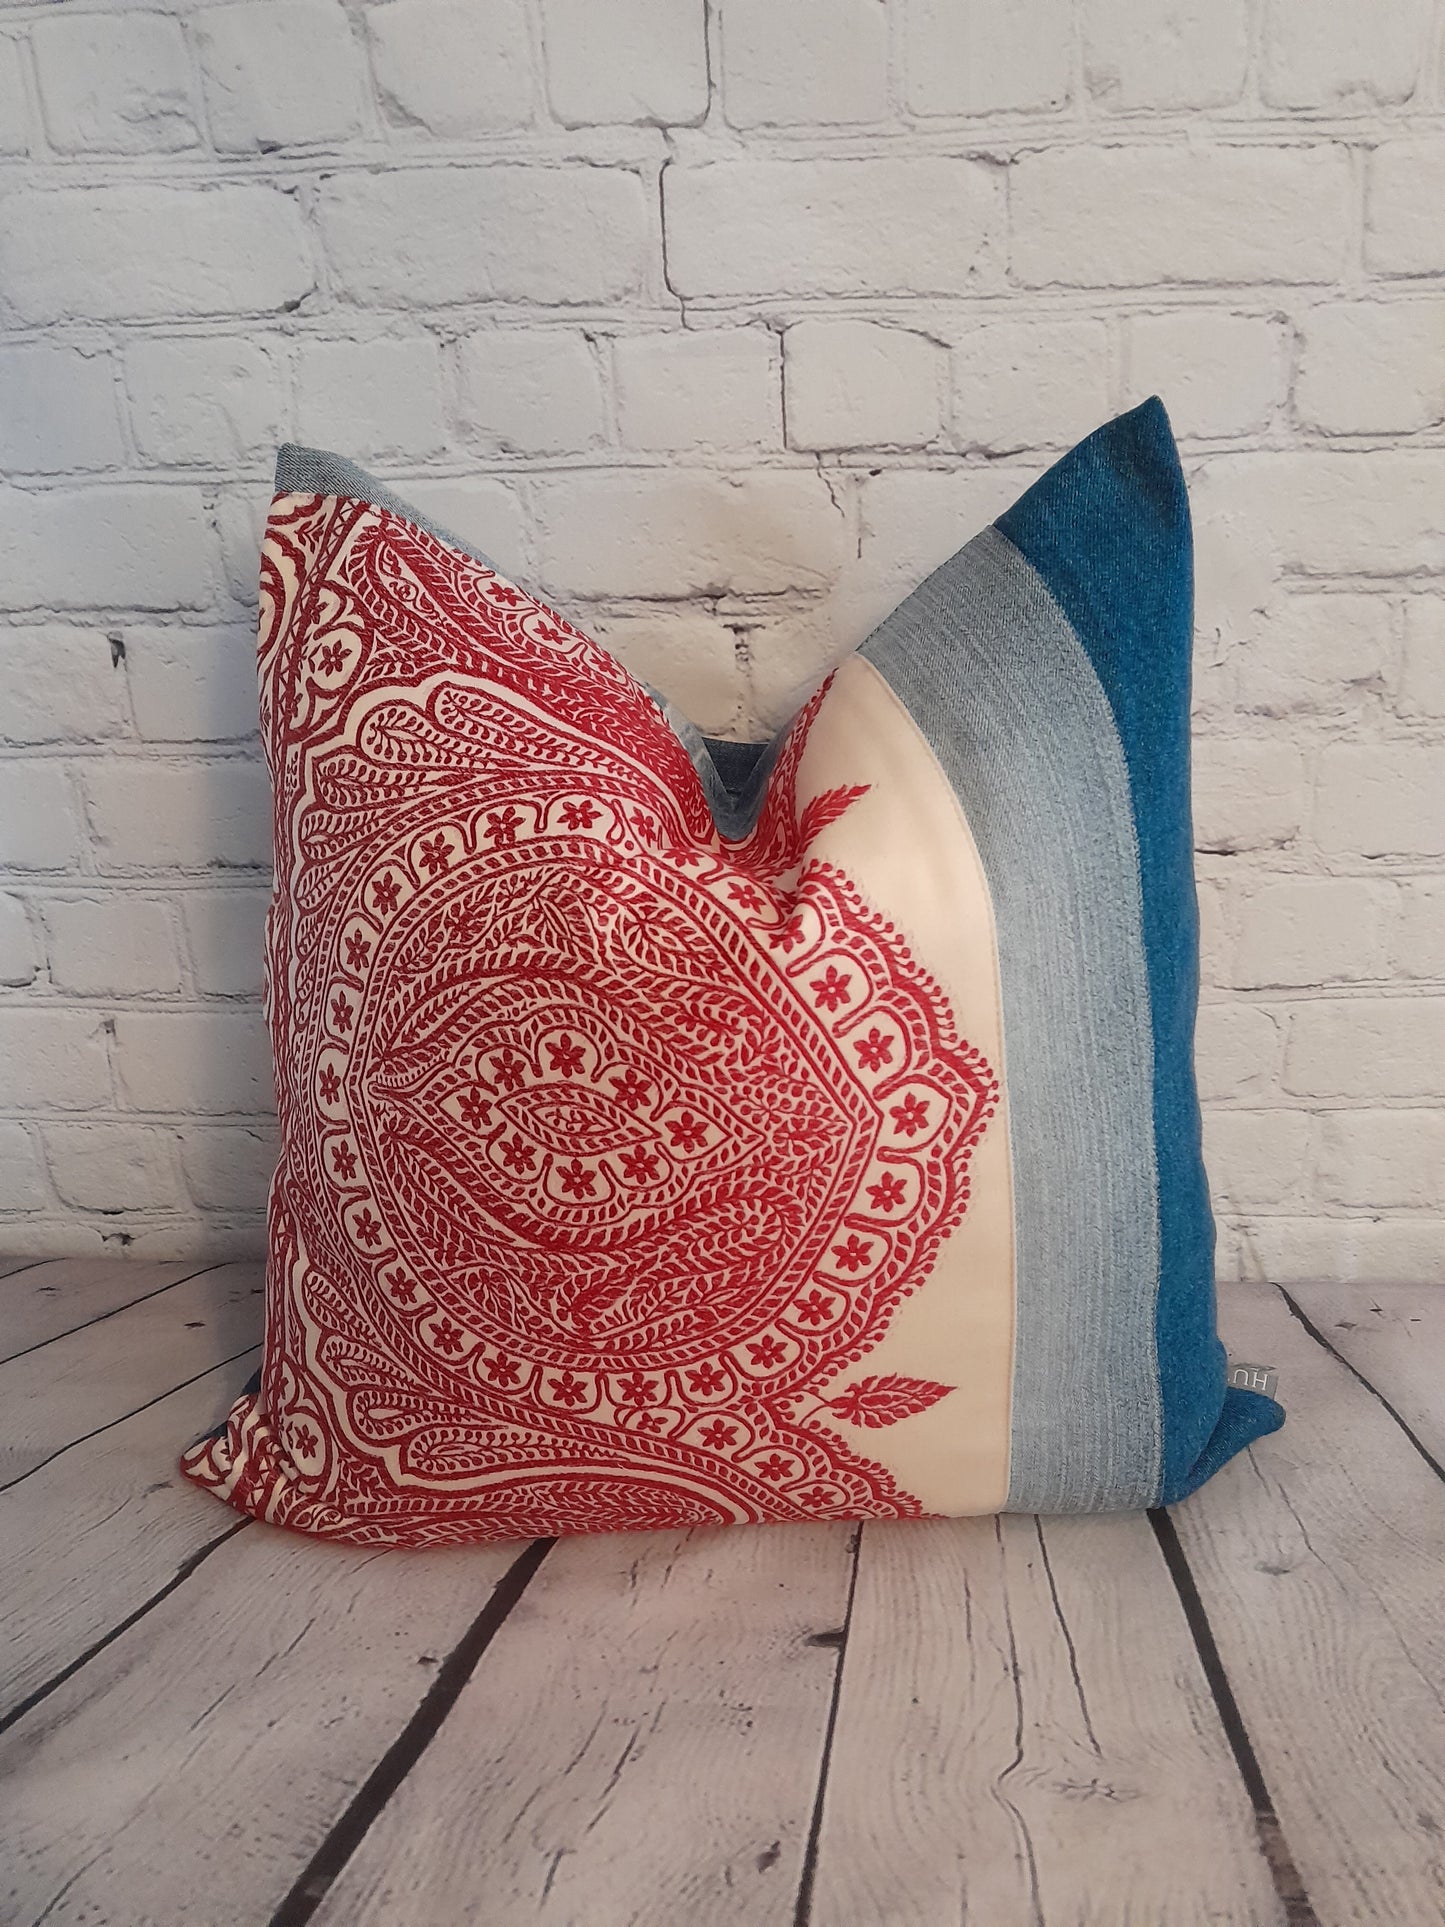 Repurposed denim cushion with boho red embroidered fabric, luxury throw pillows, hand made in the UK. Eco interior decor.